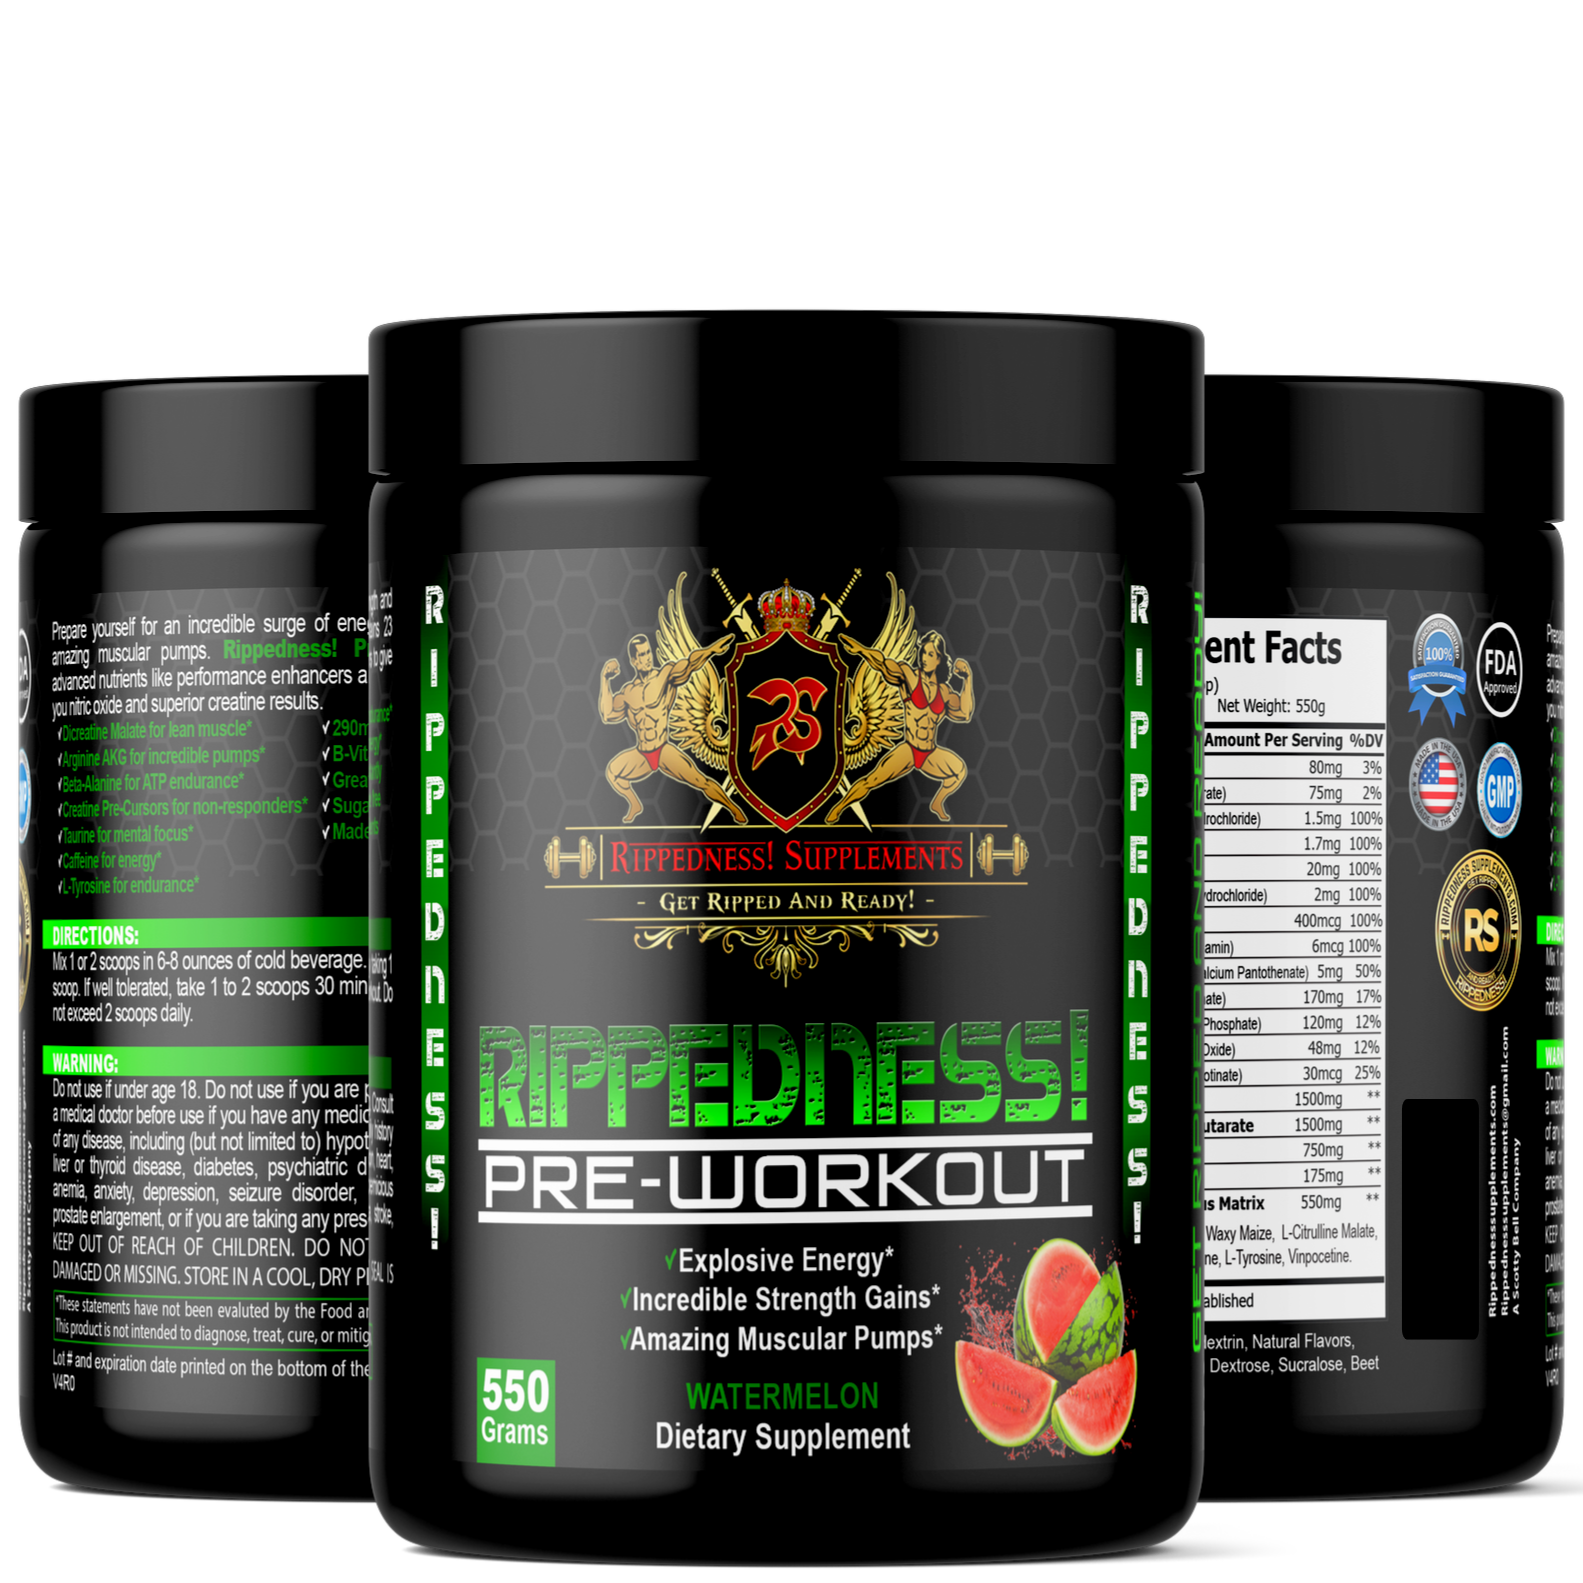 15 Minute Green pre workout supplement for push your ABS